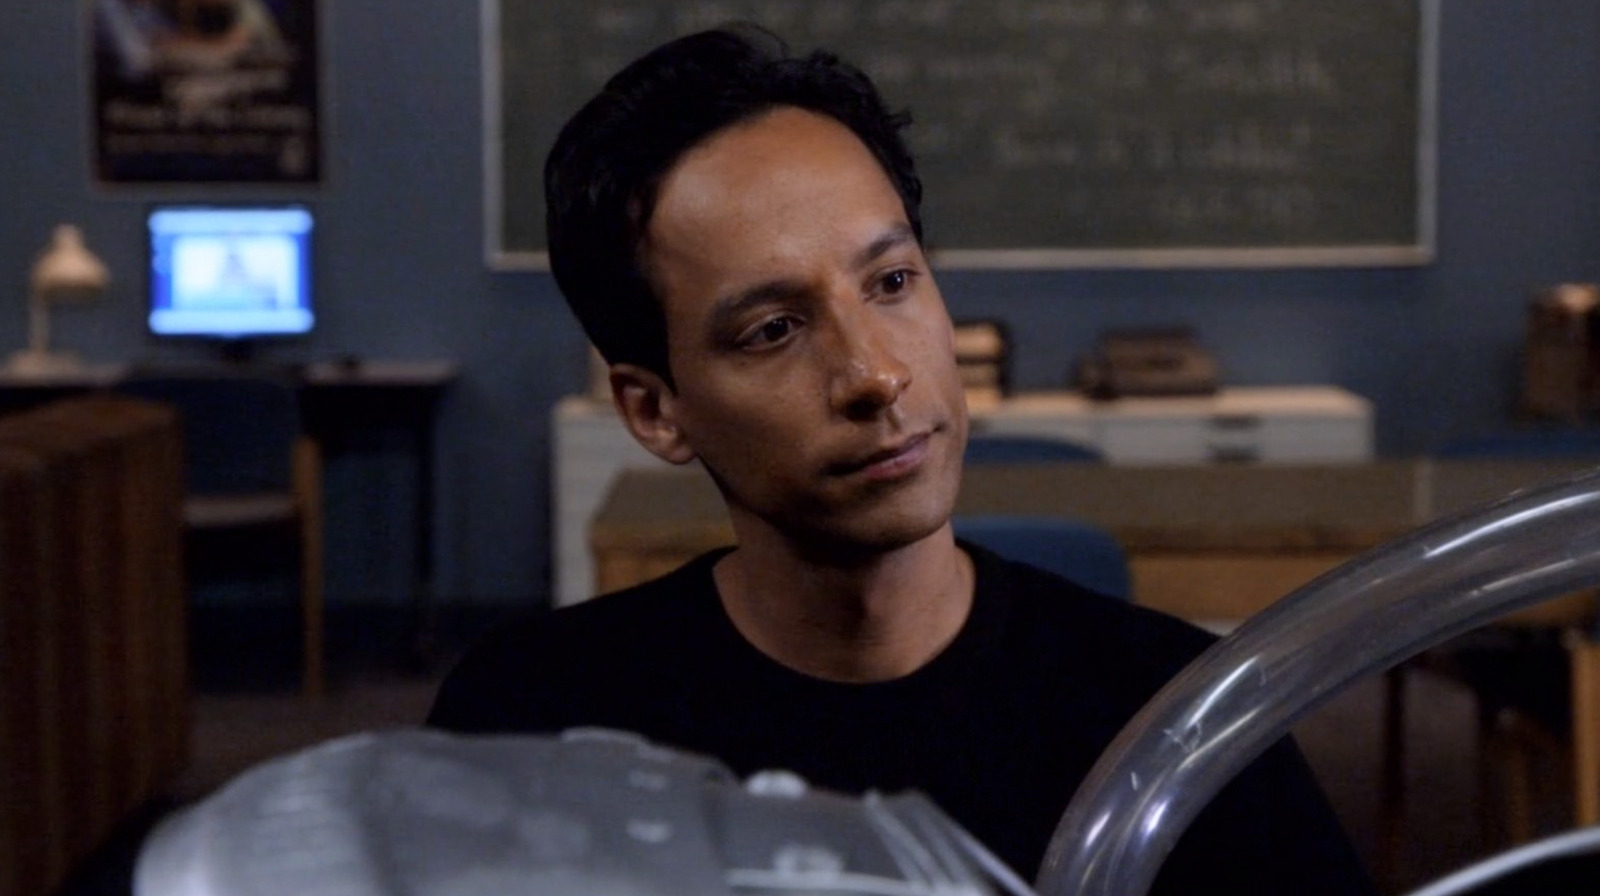 Community's Danny Pudi Related To Abed On A Deeper Level